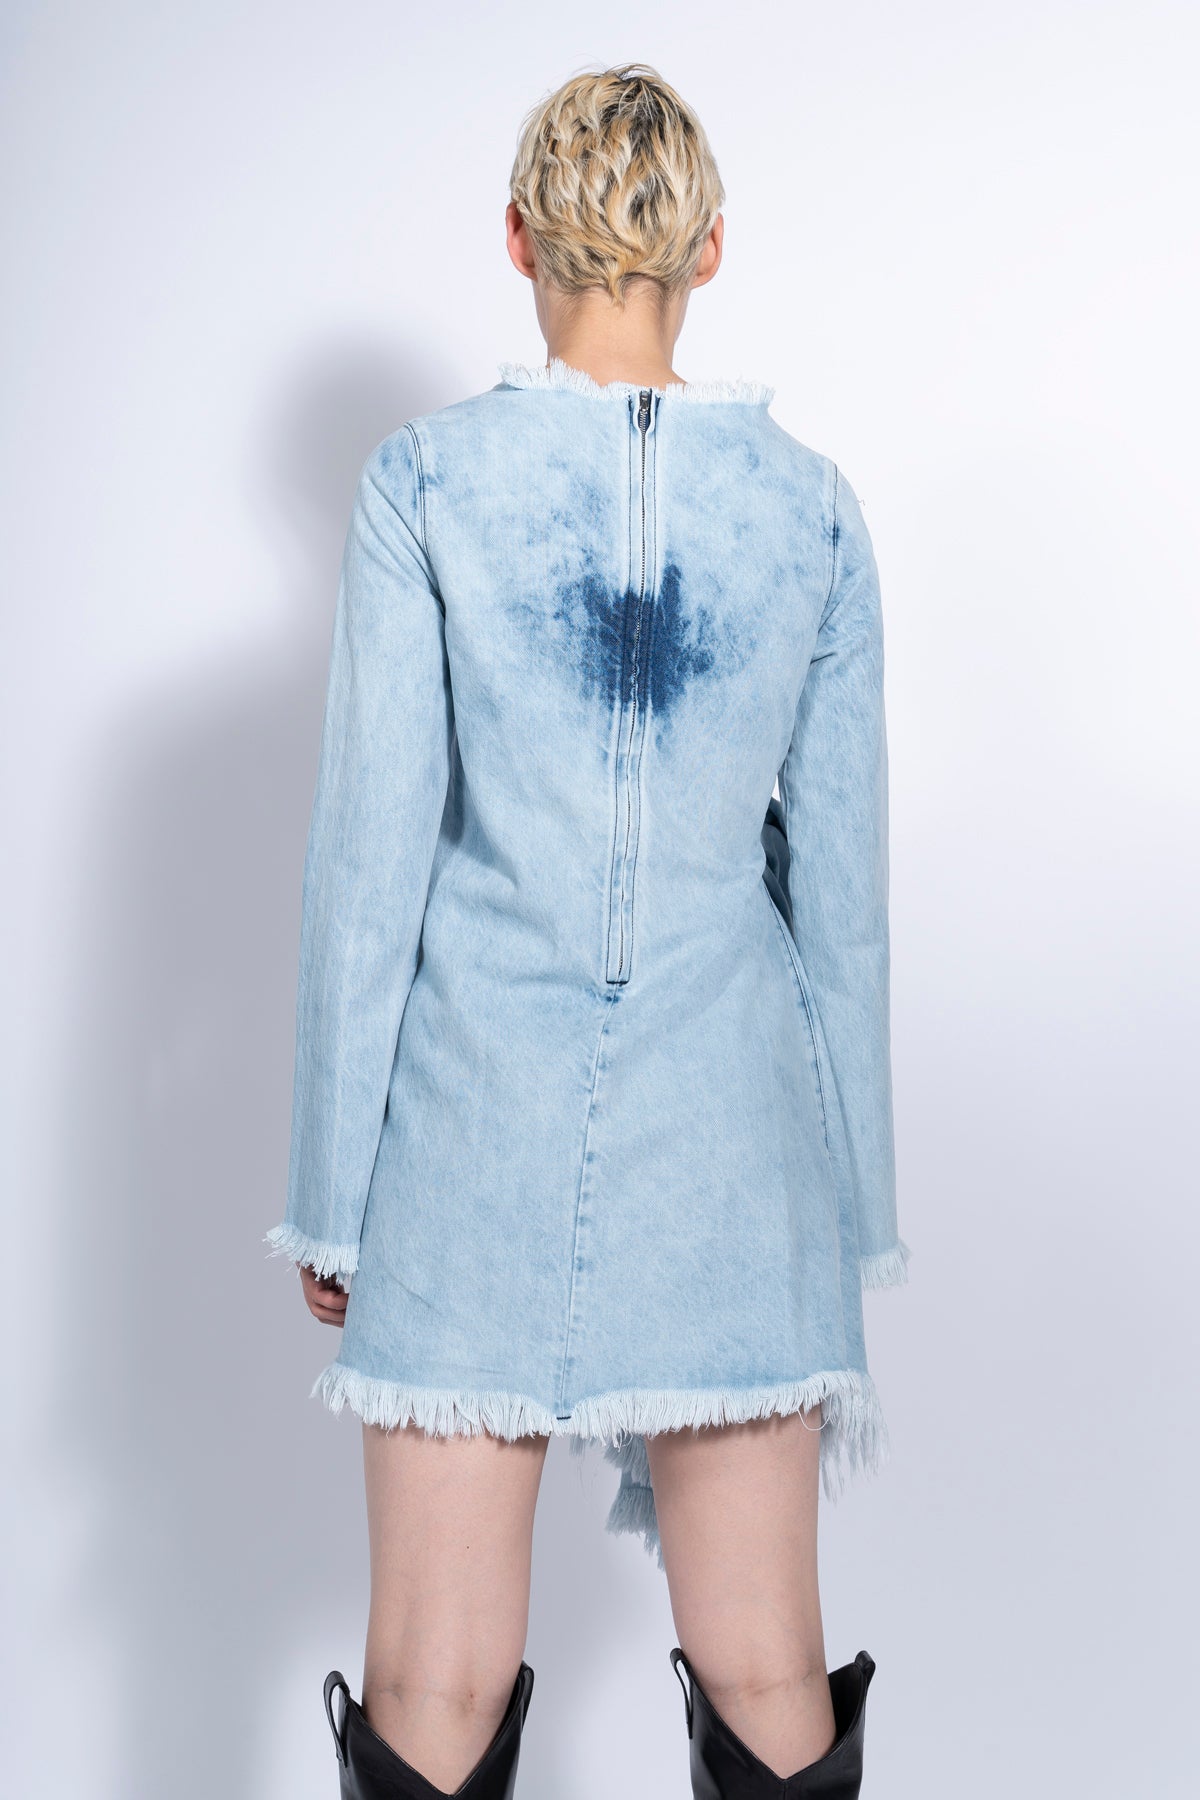 BLUE JANIS DRESS WITH FRONT PLEATS marques almeida